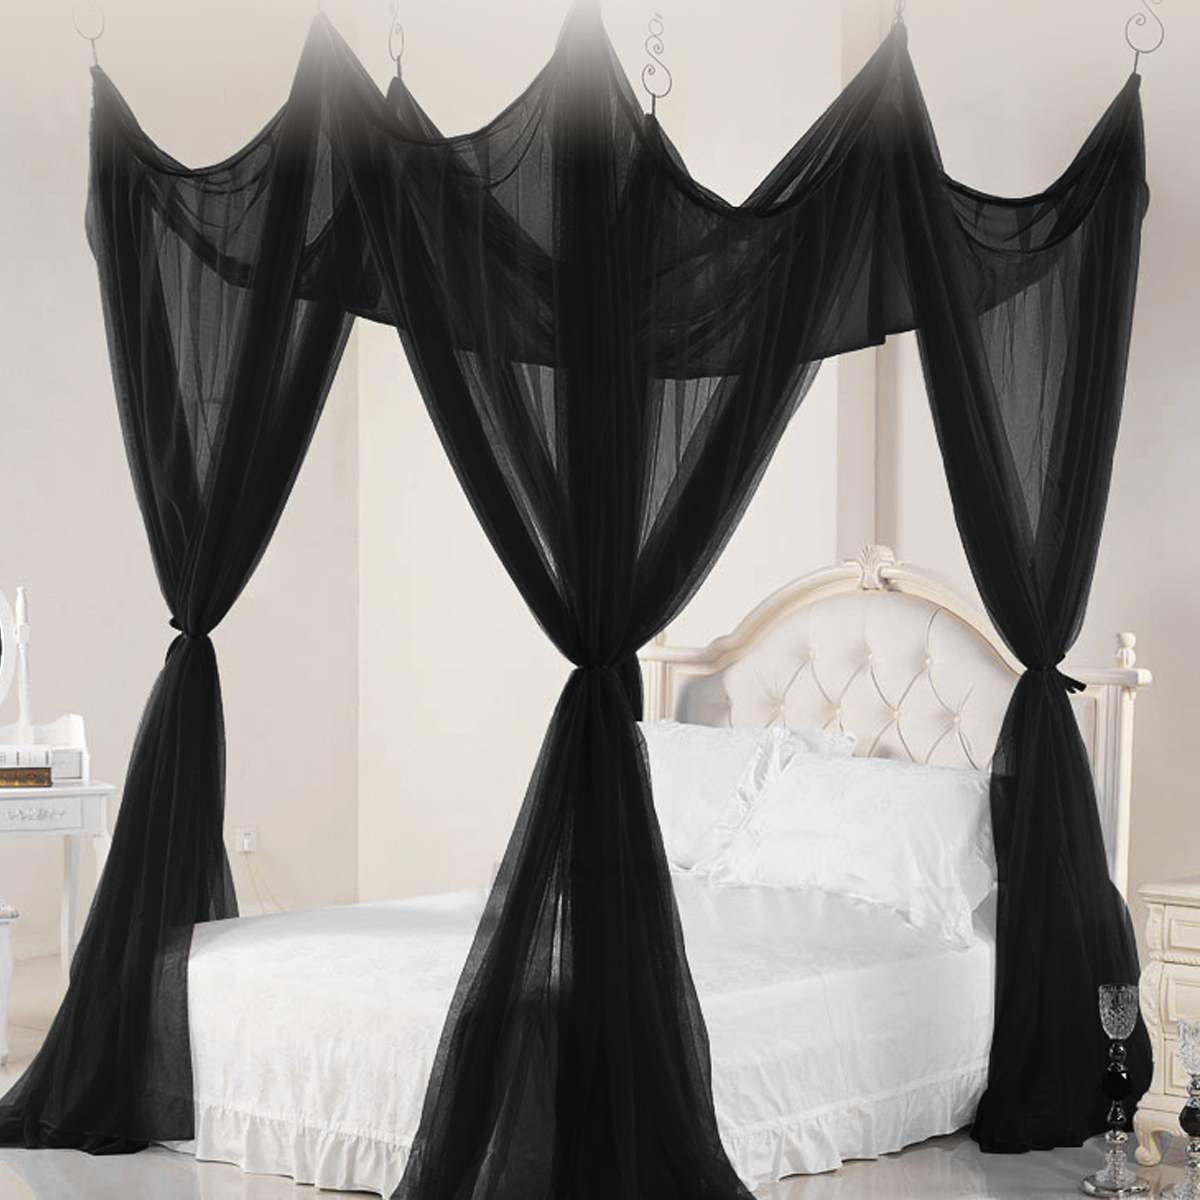 Moustiquaire Canopy White Black Four Corner Post Student Canopy Bed Mosquito Net Netting Queen King Size